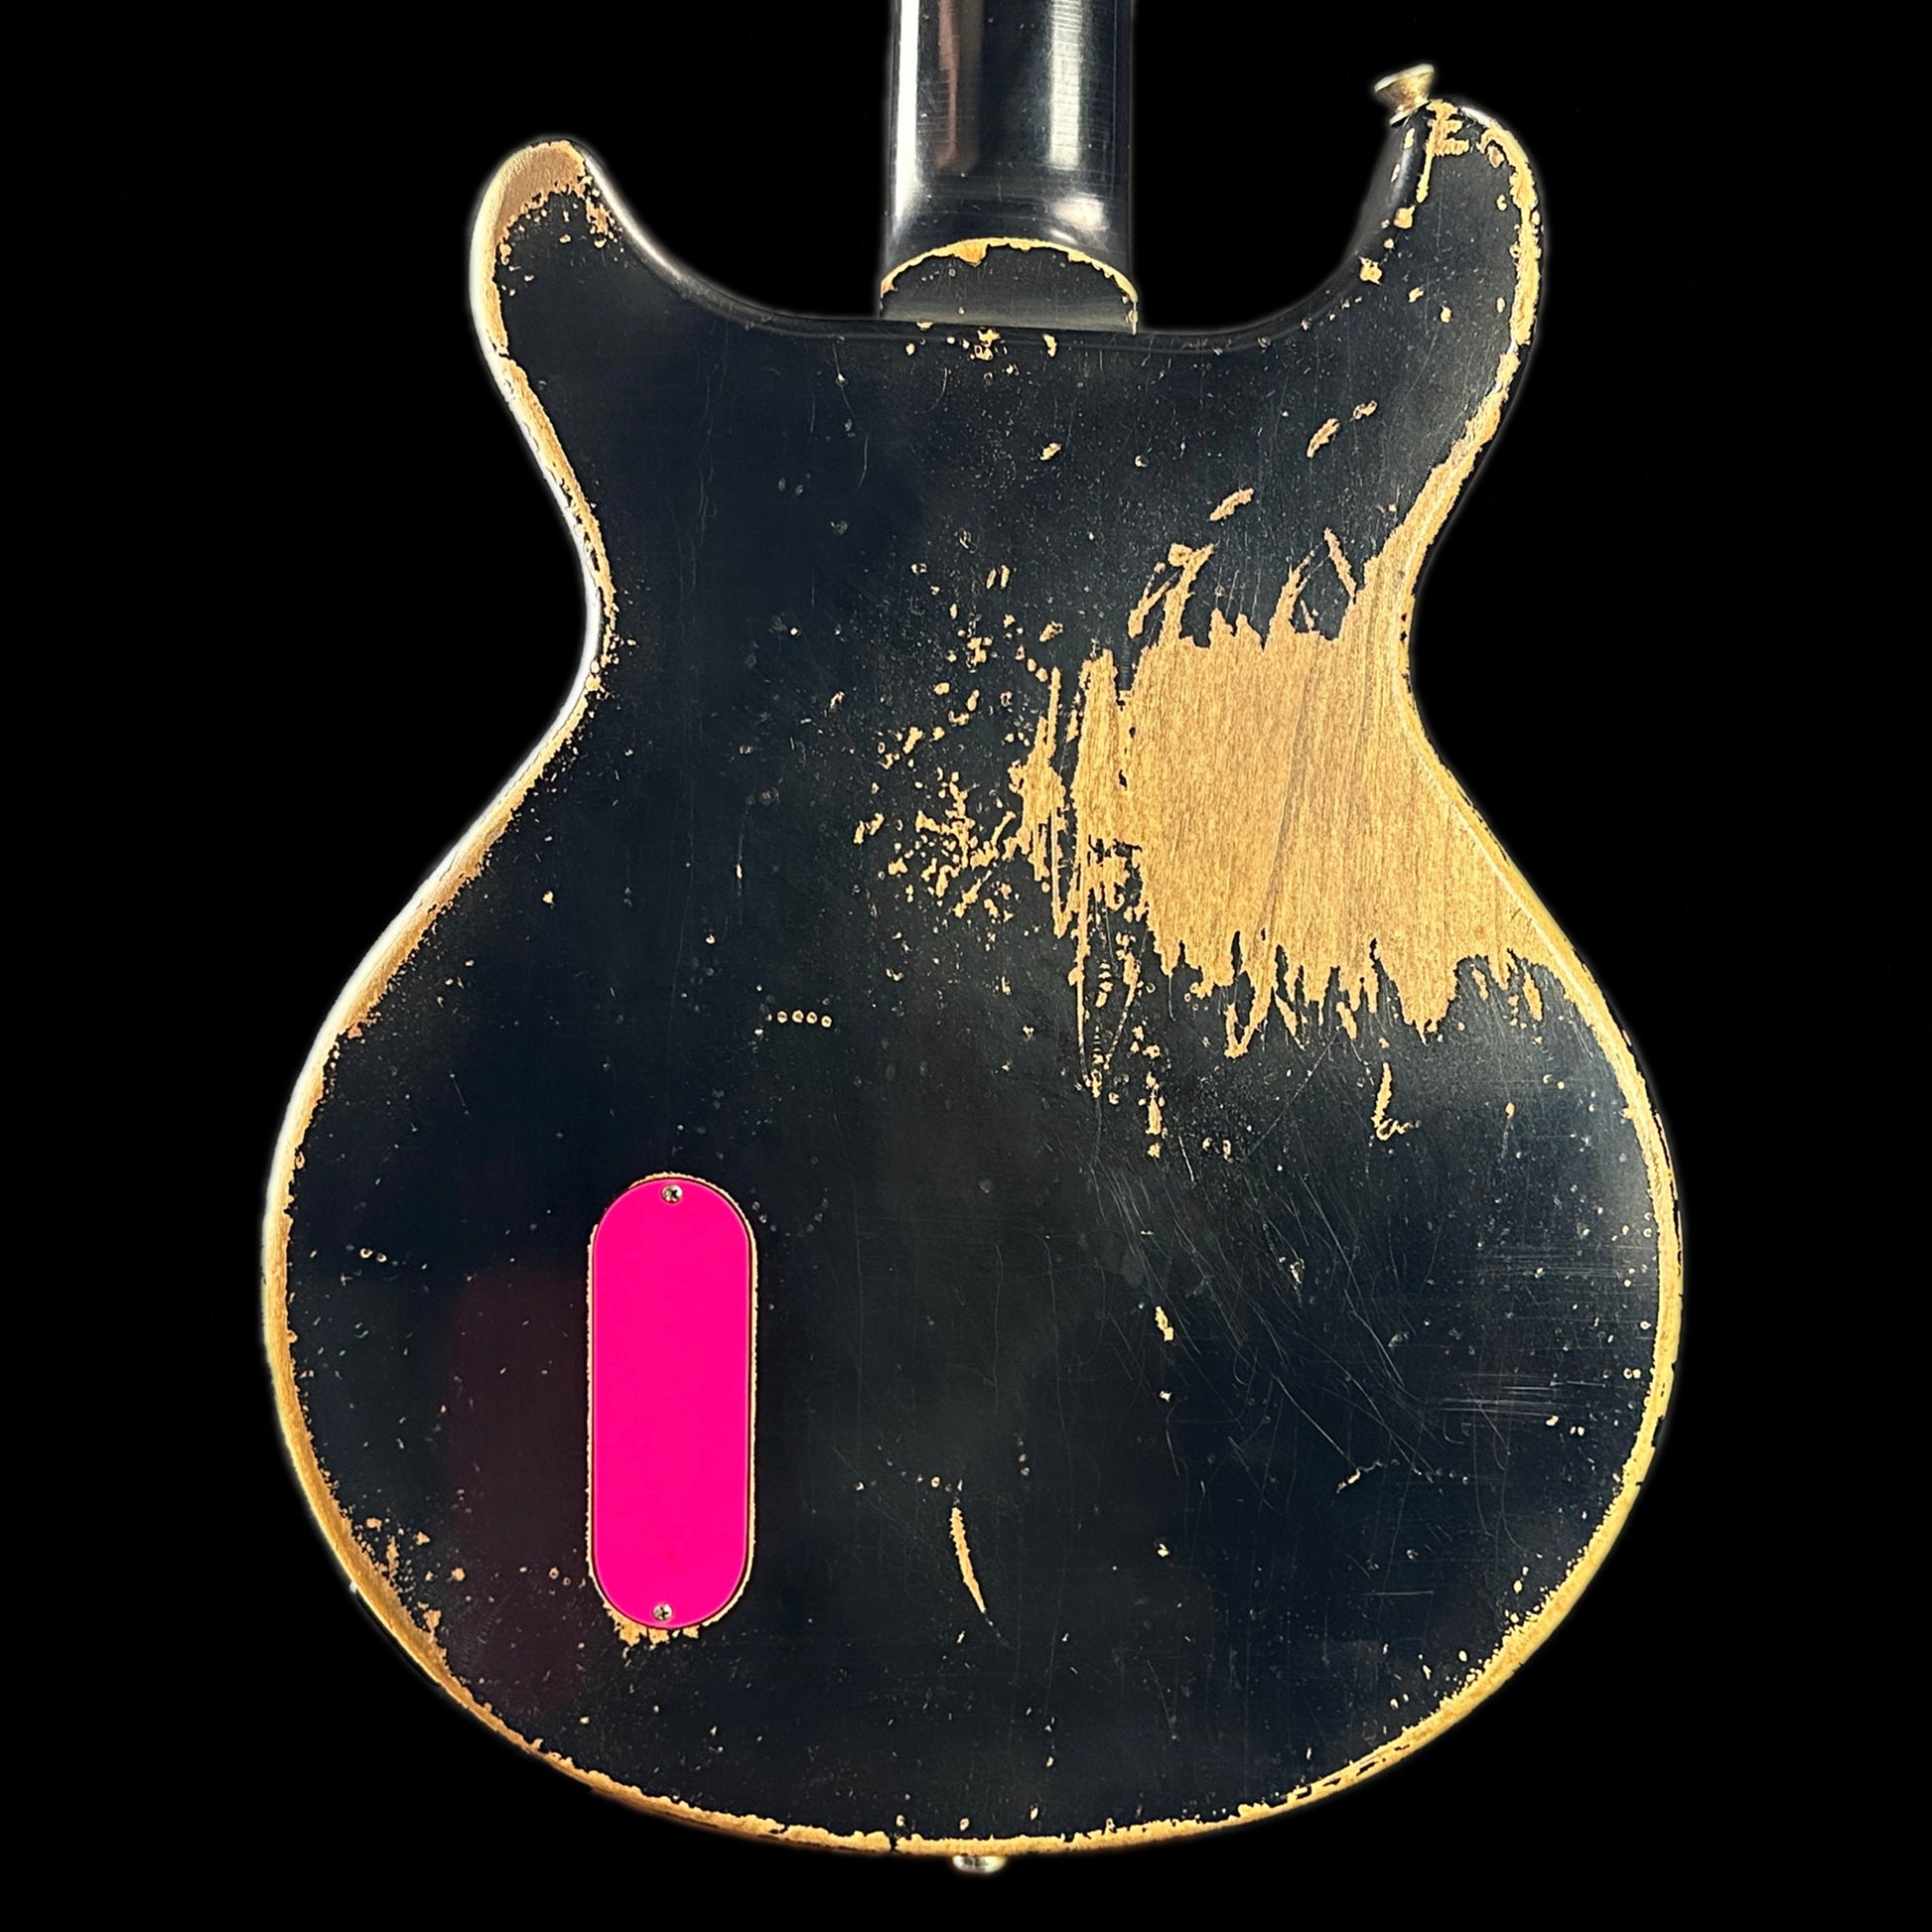 Back of body of Rock N Roll Relics Thunders DC Black w/Pink.